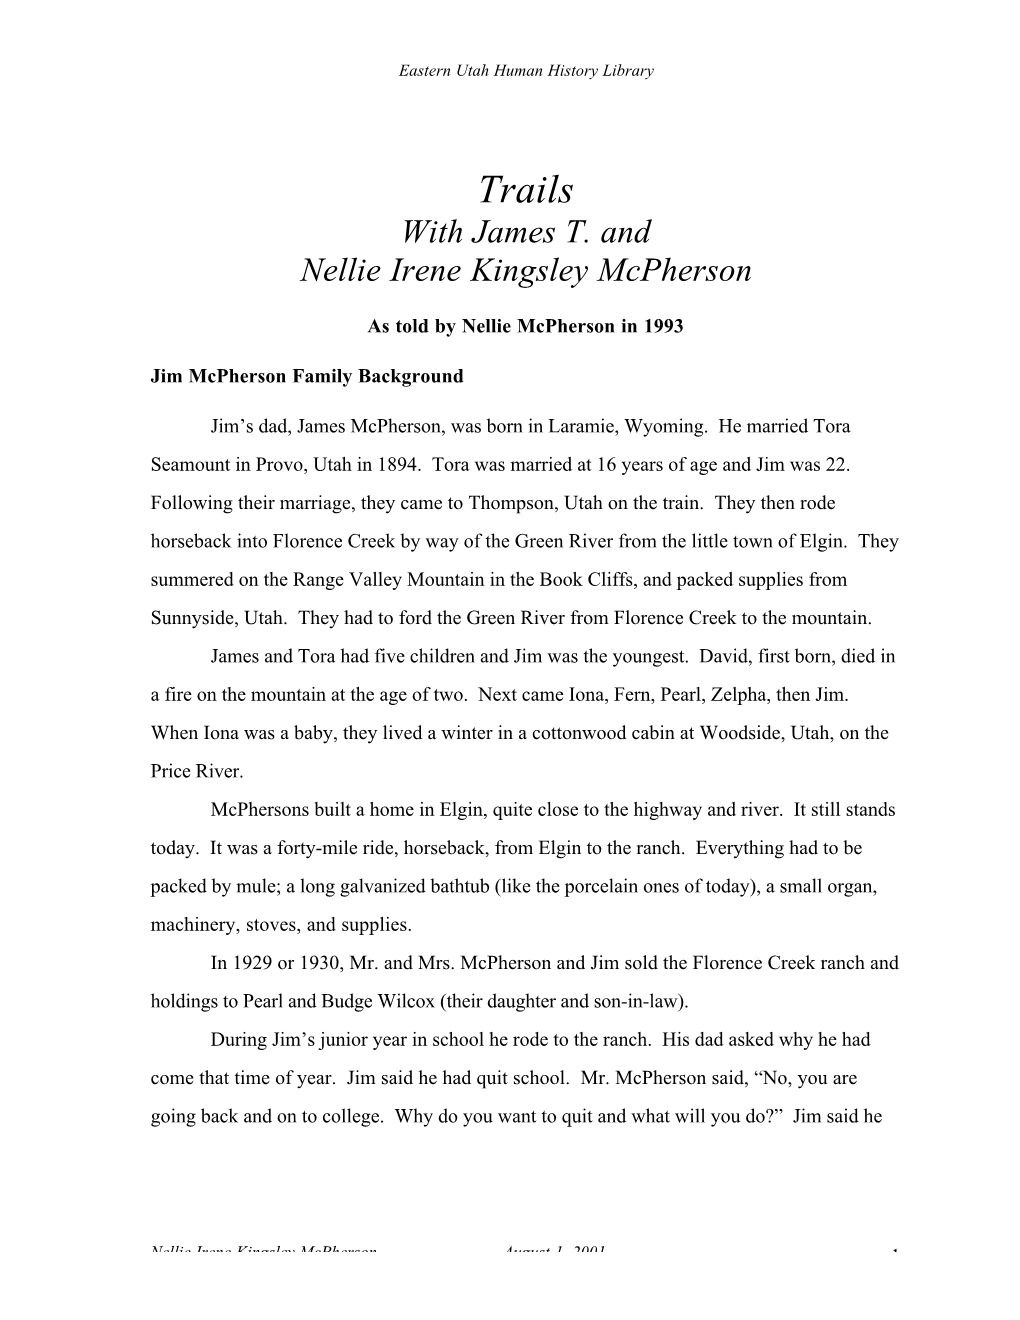 Trails with James T. and Nellie Irene Kingsley Mcpherson